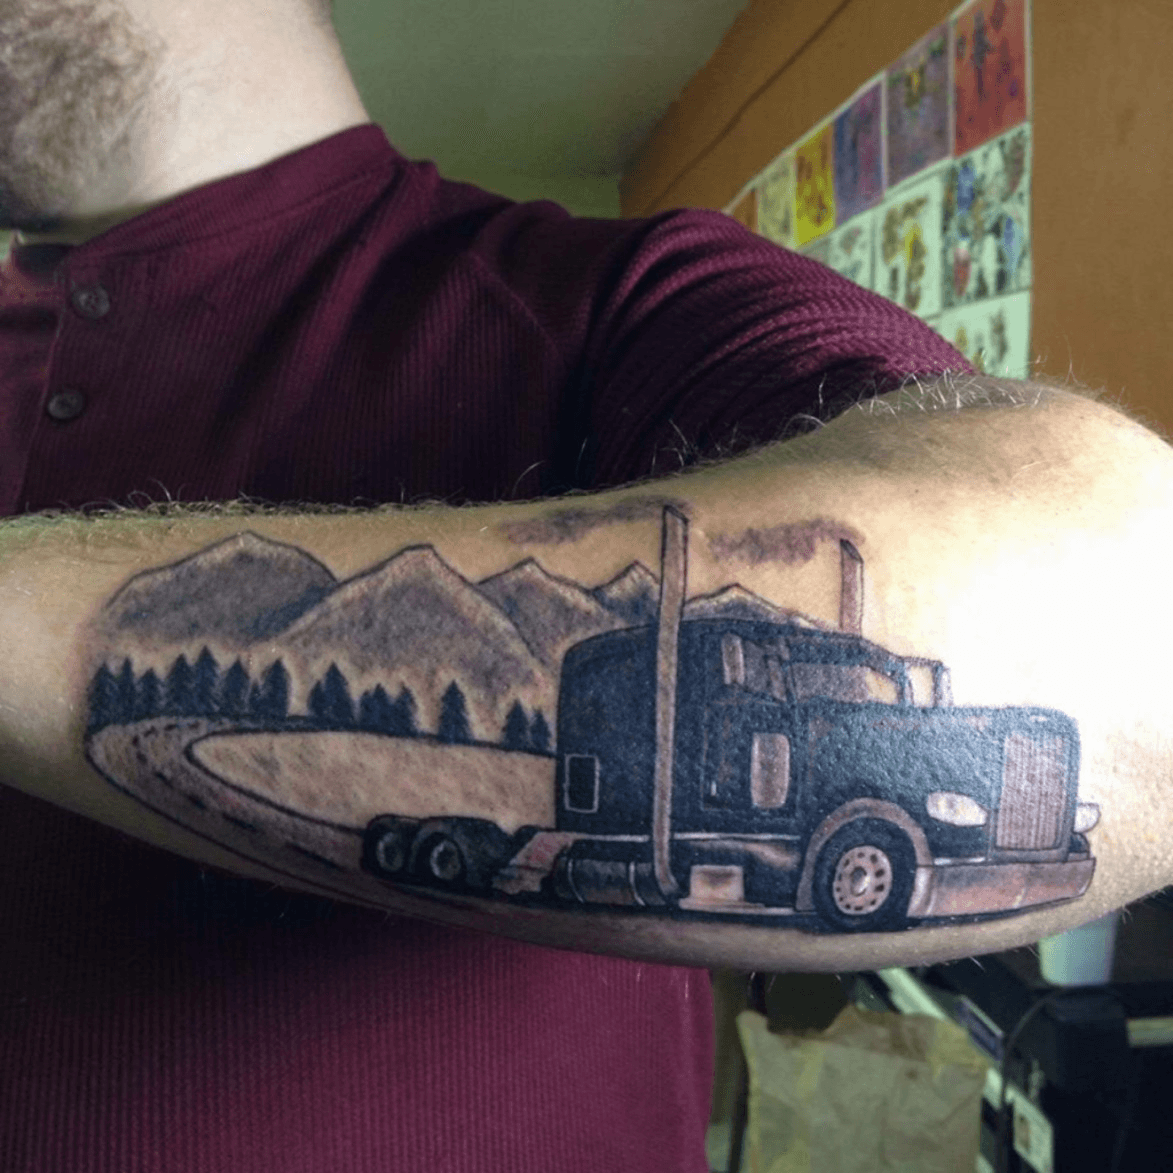 Mack Trucks  Worn with pride Drop pics of your Mack tattoo in the  comments   Facebook